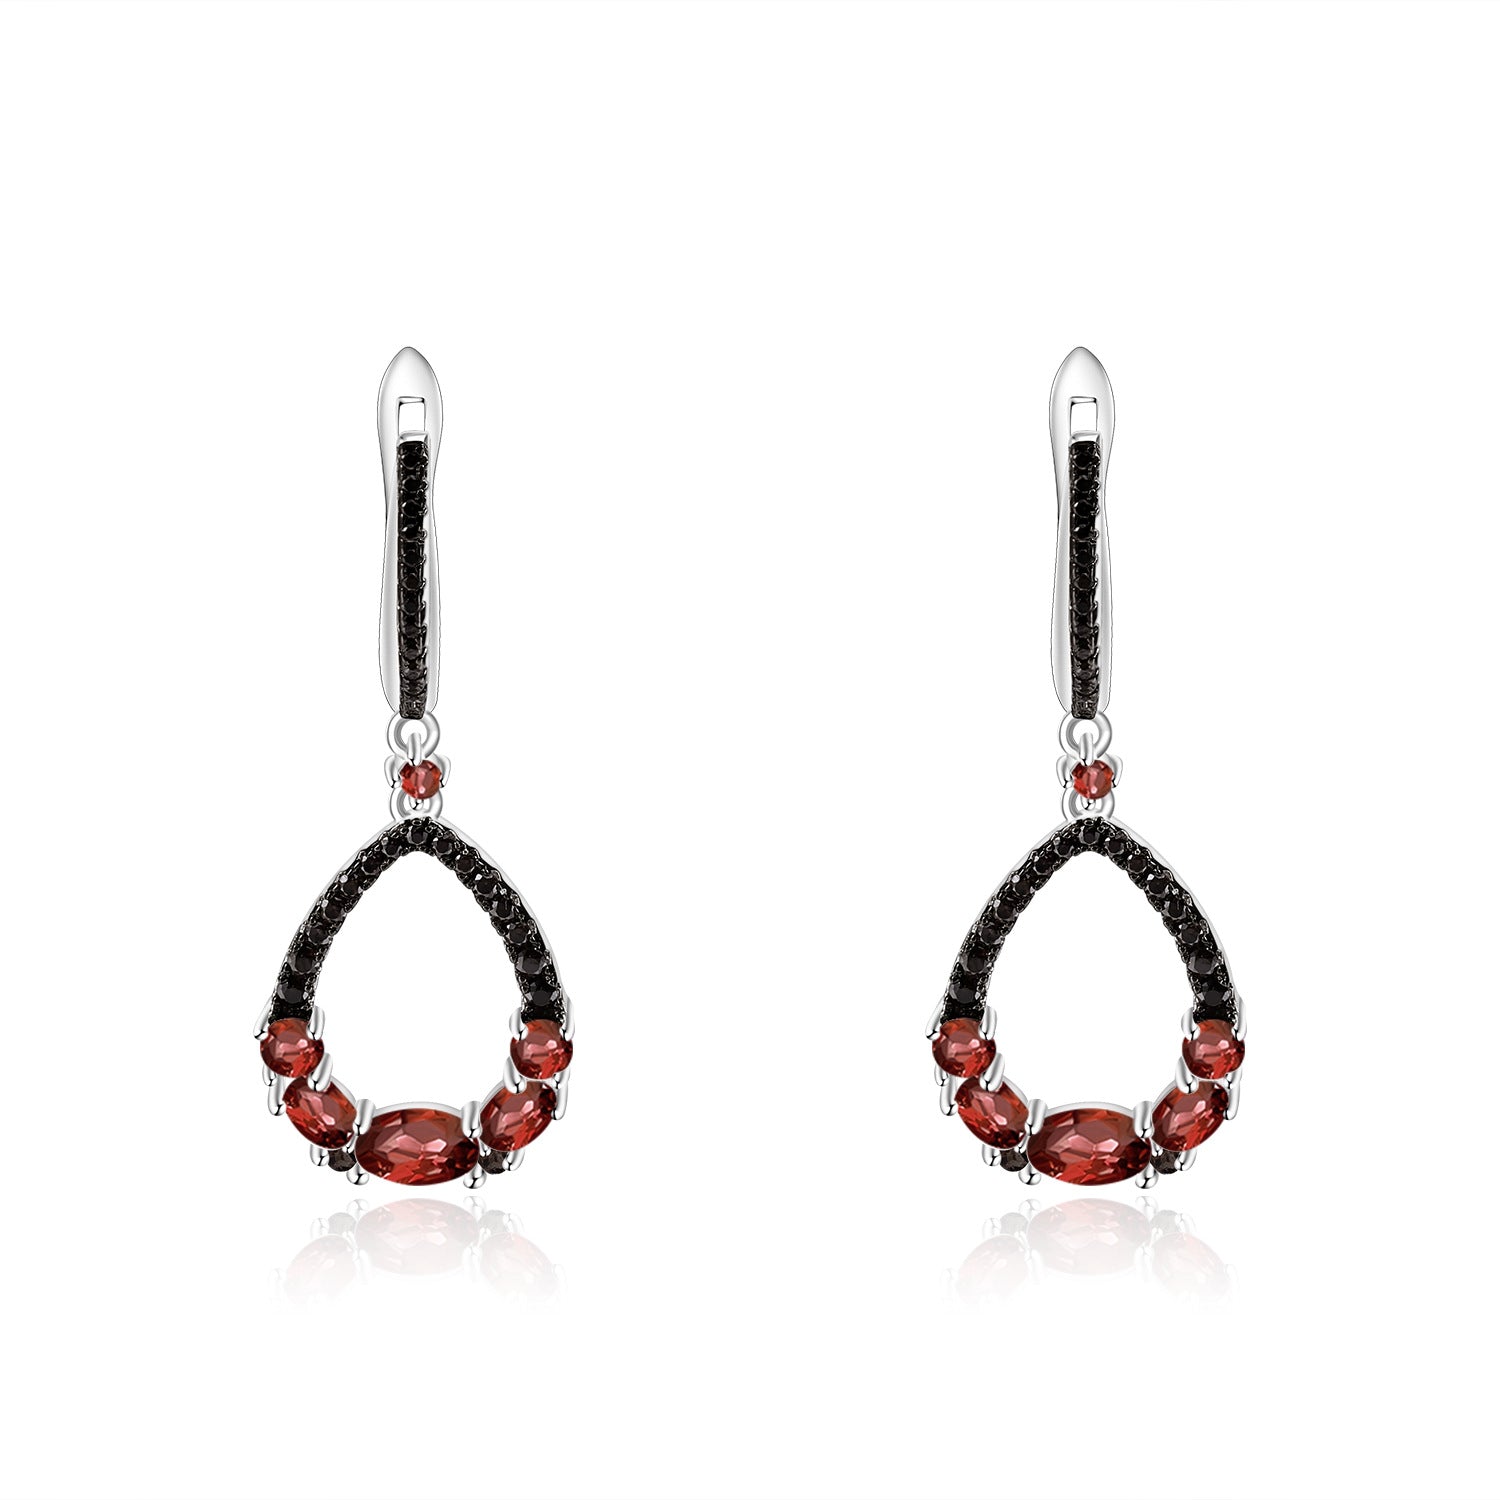 Natural Colourful Gemstones Silver Drop Earrings for Women